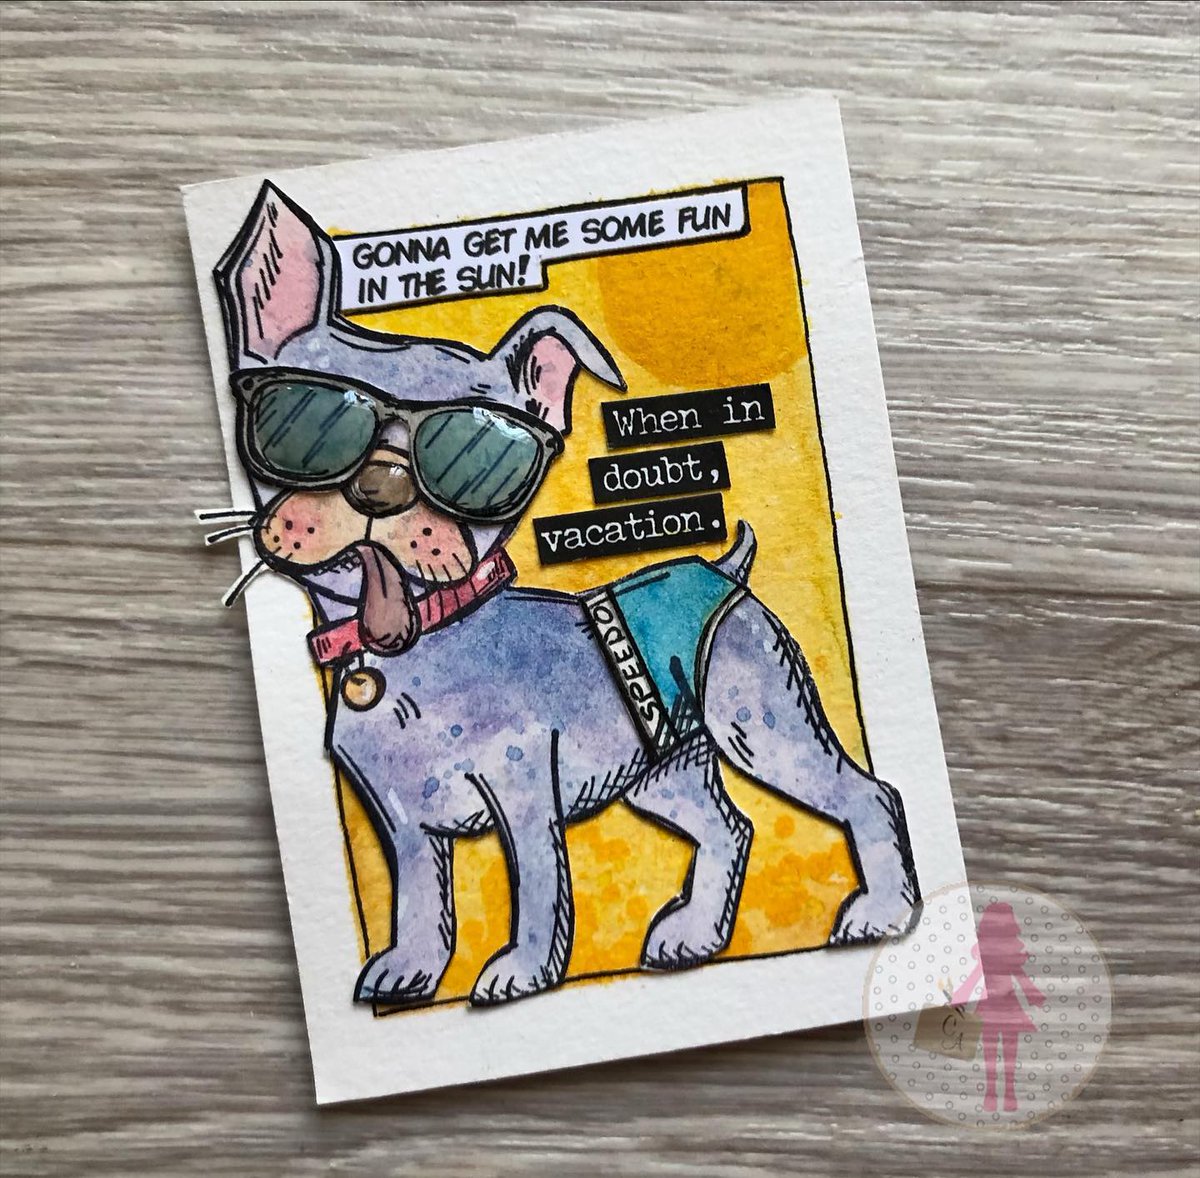 dog days of summer 🐶🩲 #timholtzstamps Crazy Dogs + Crazy Things and Distress Inks

✂️ #handmade by @crafty_adventurista

#dogdaysofsummer #summercrafts #crafts #DIY #mixedmedia #onlineshopping #stampersanonymous #timholtz